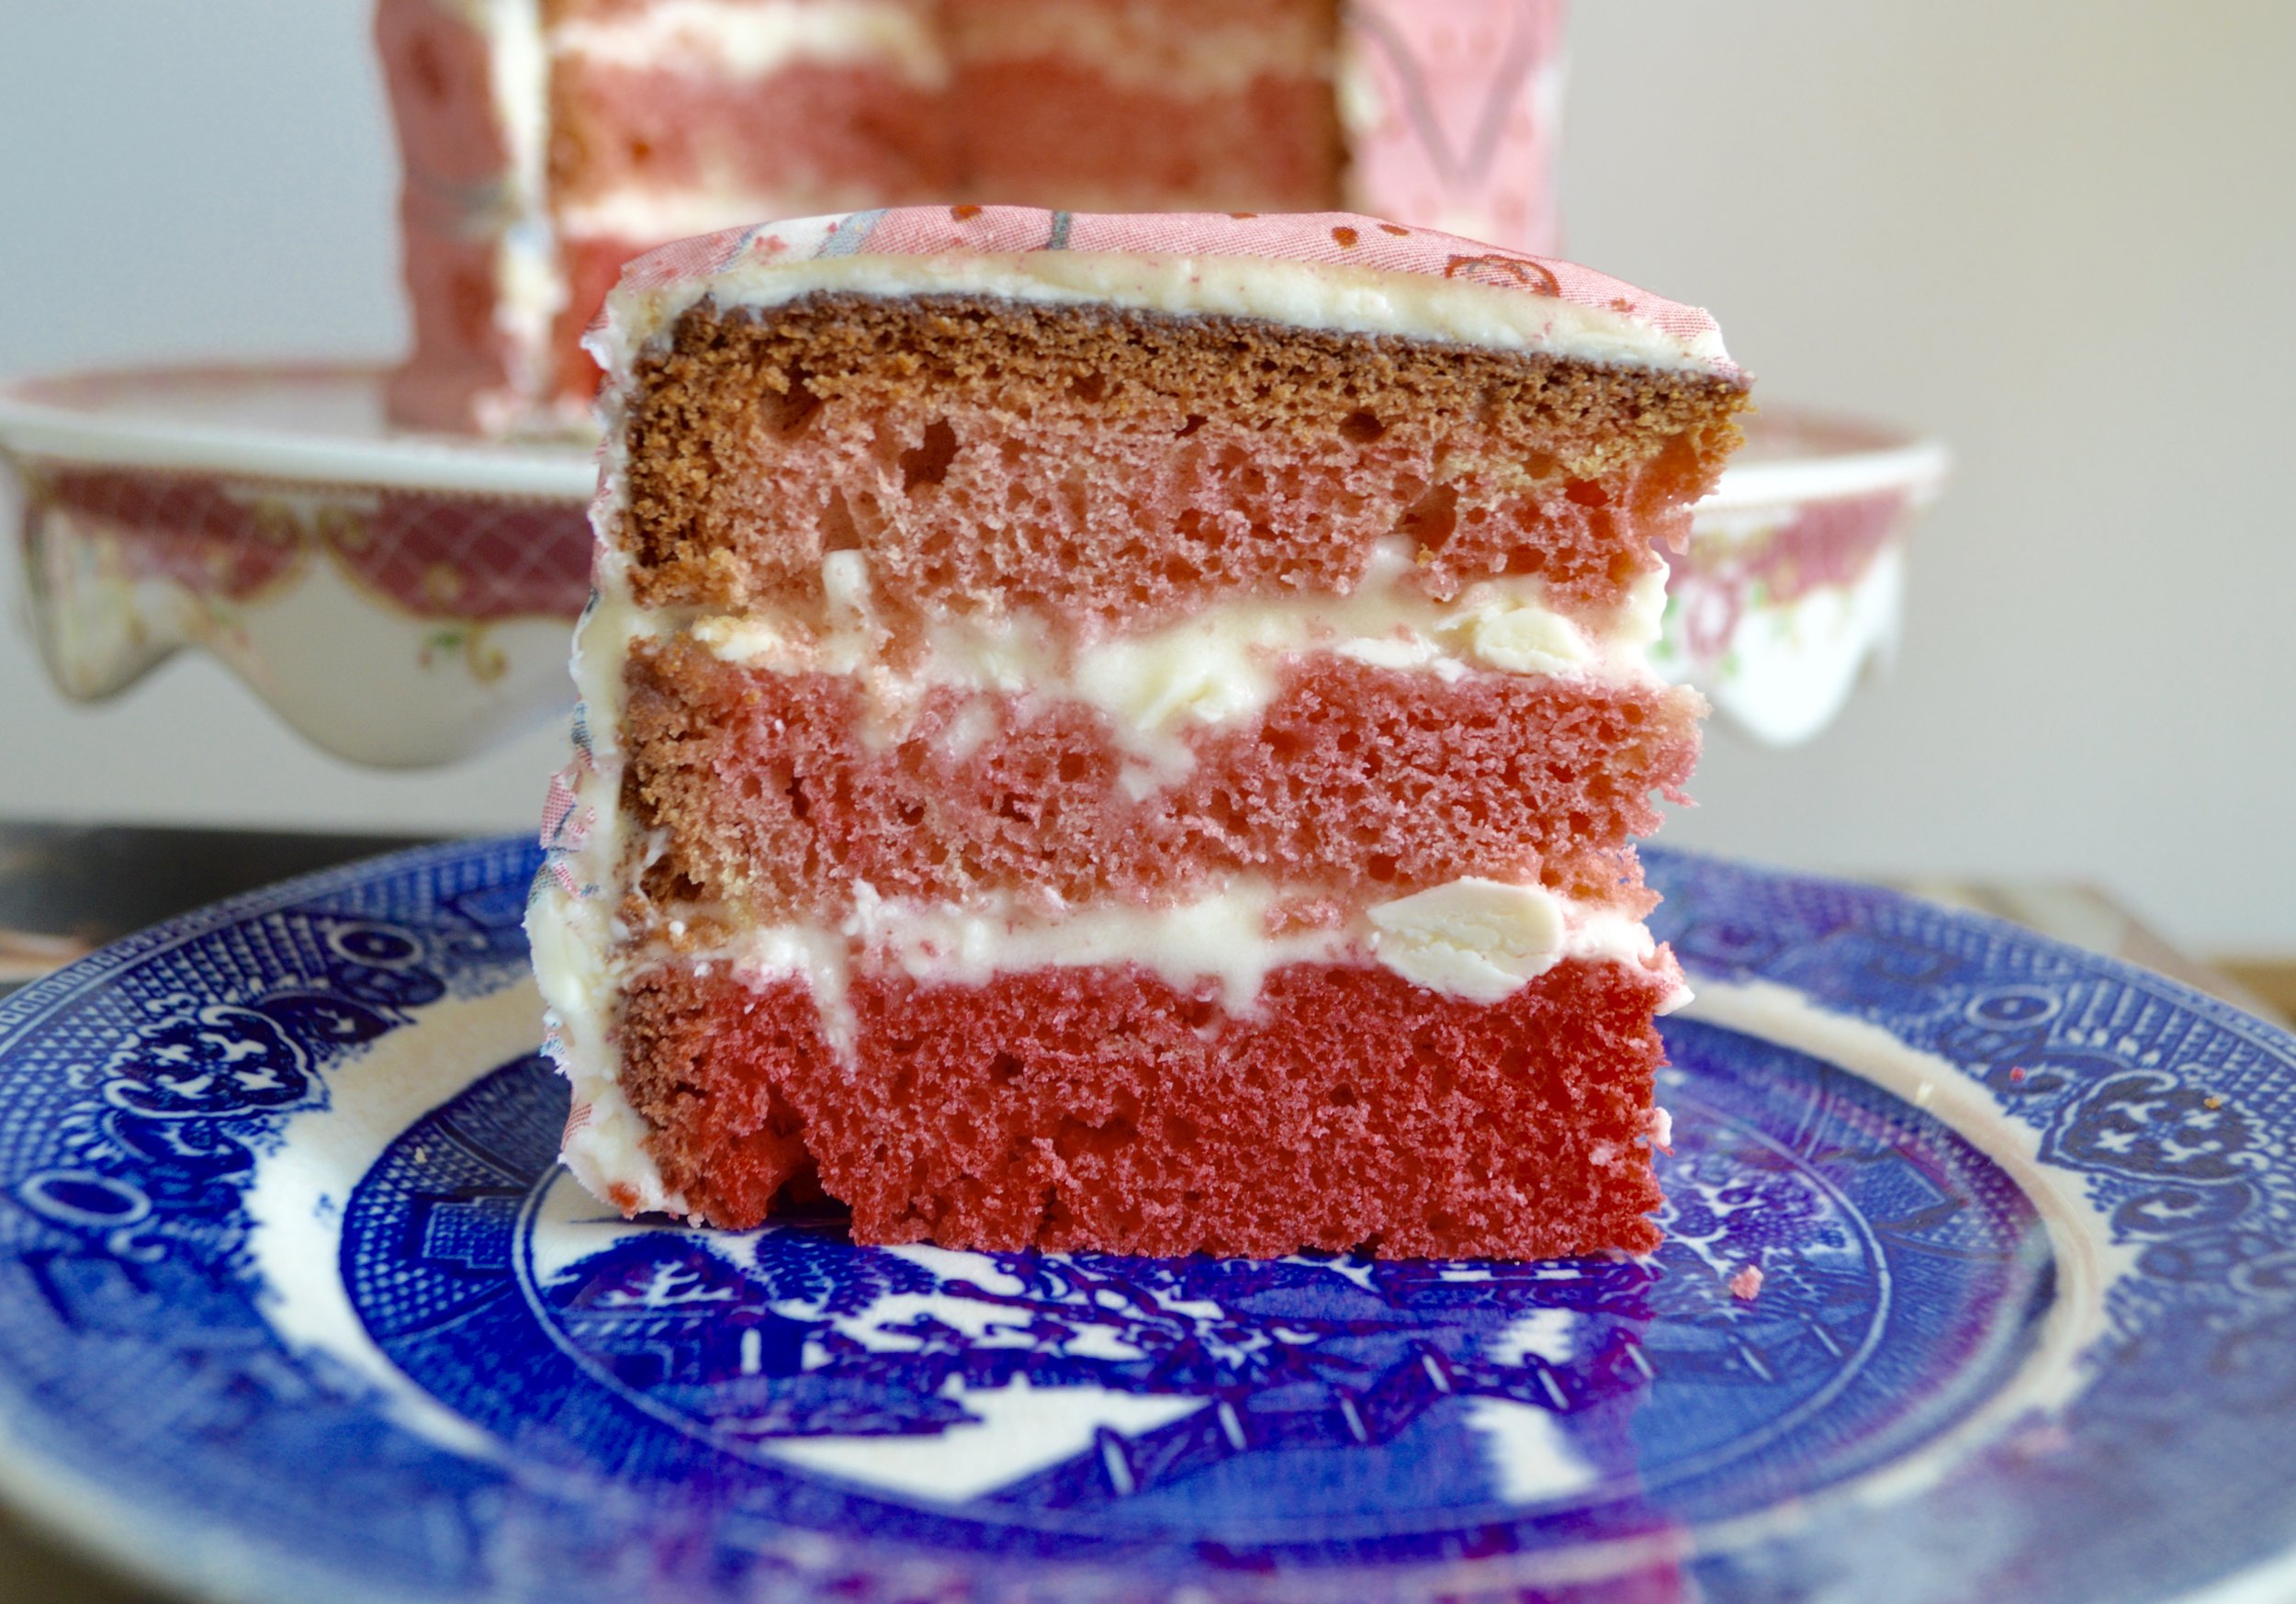 Ombré Pink Cake with Lovebirds Chefanie Sheets (available  by subscription only )